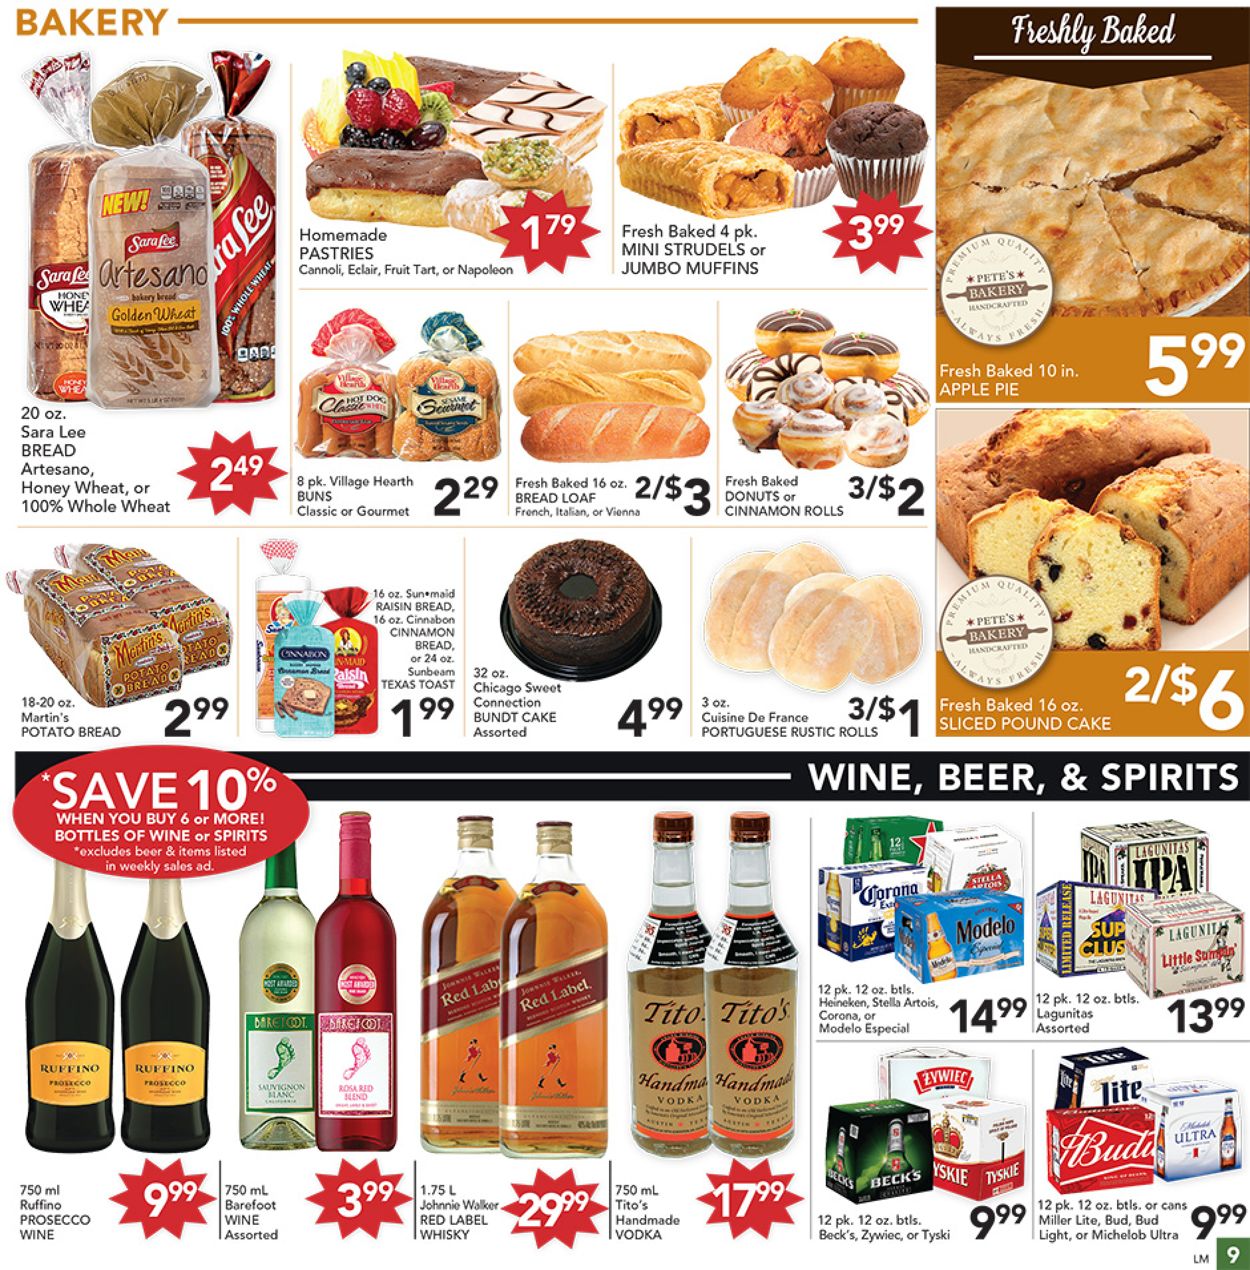 Catalogue Pete's Fresh Market from 09/09/2020